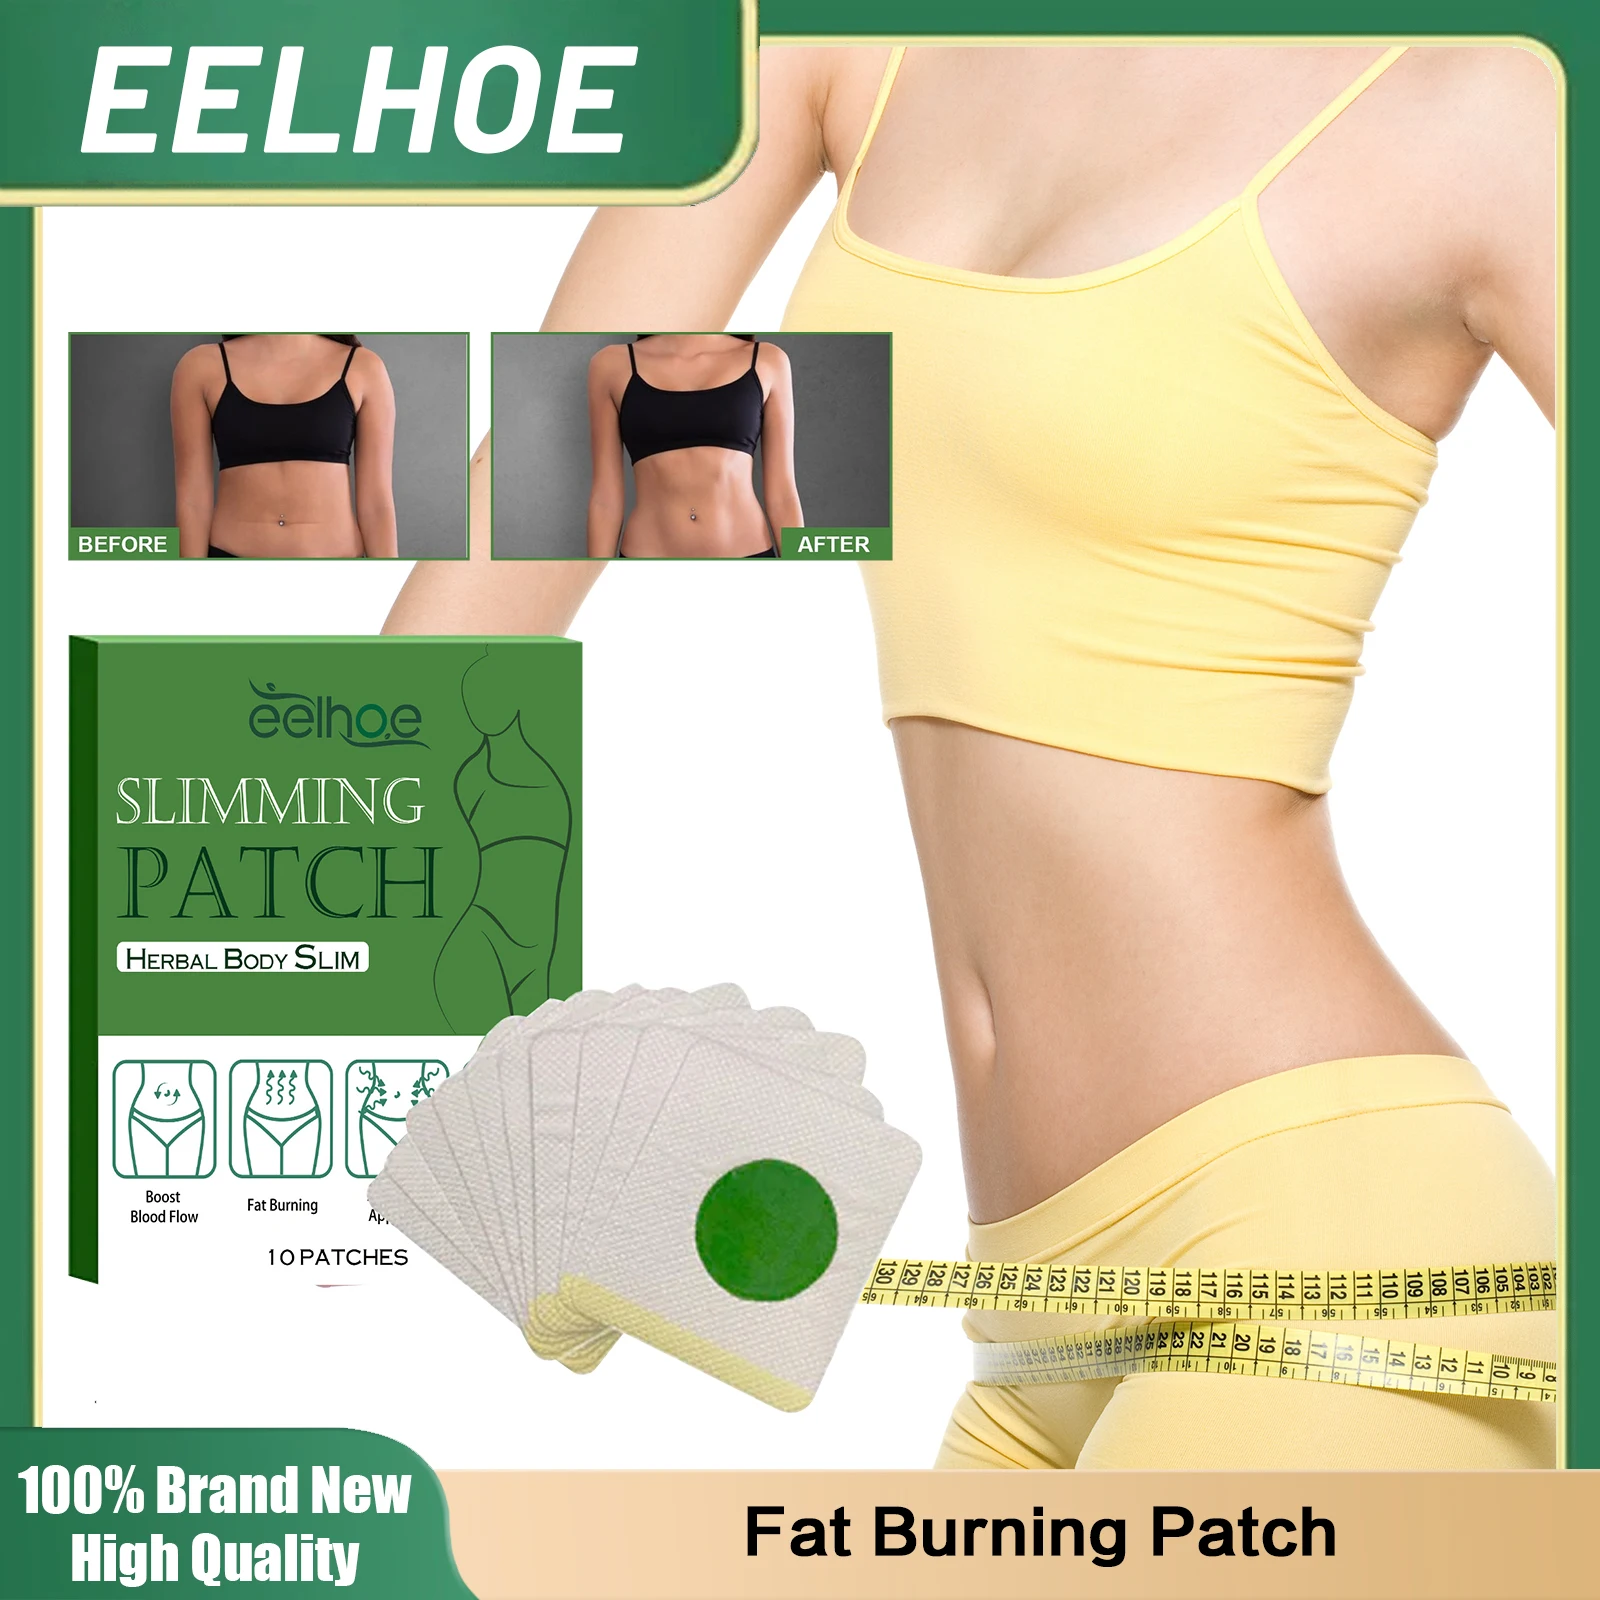 

Fat Burning Patch Thin Arm Thigh Belly Reduce Tummy Cellulite Abdomen Slimming Body Sculpting Detox Weight Loss Navel Sticker